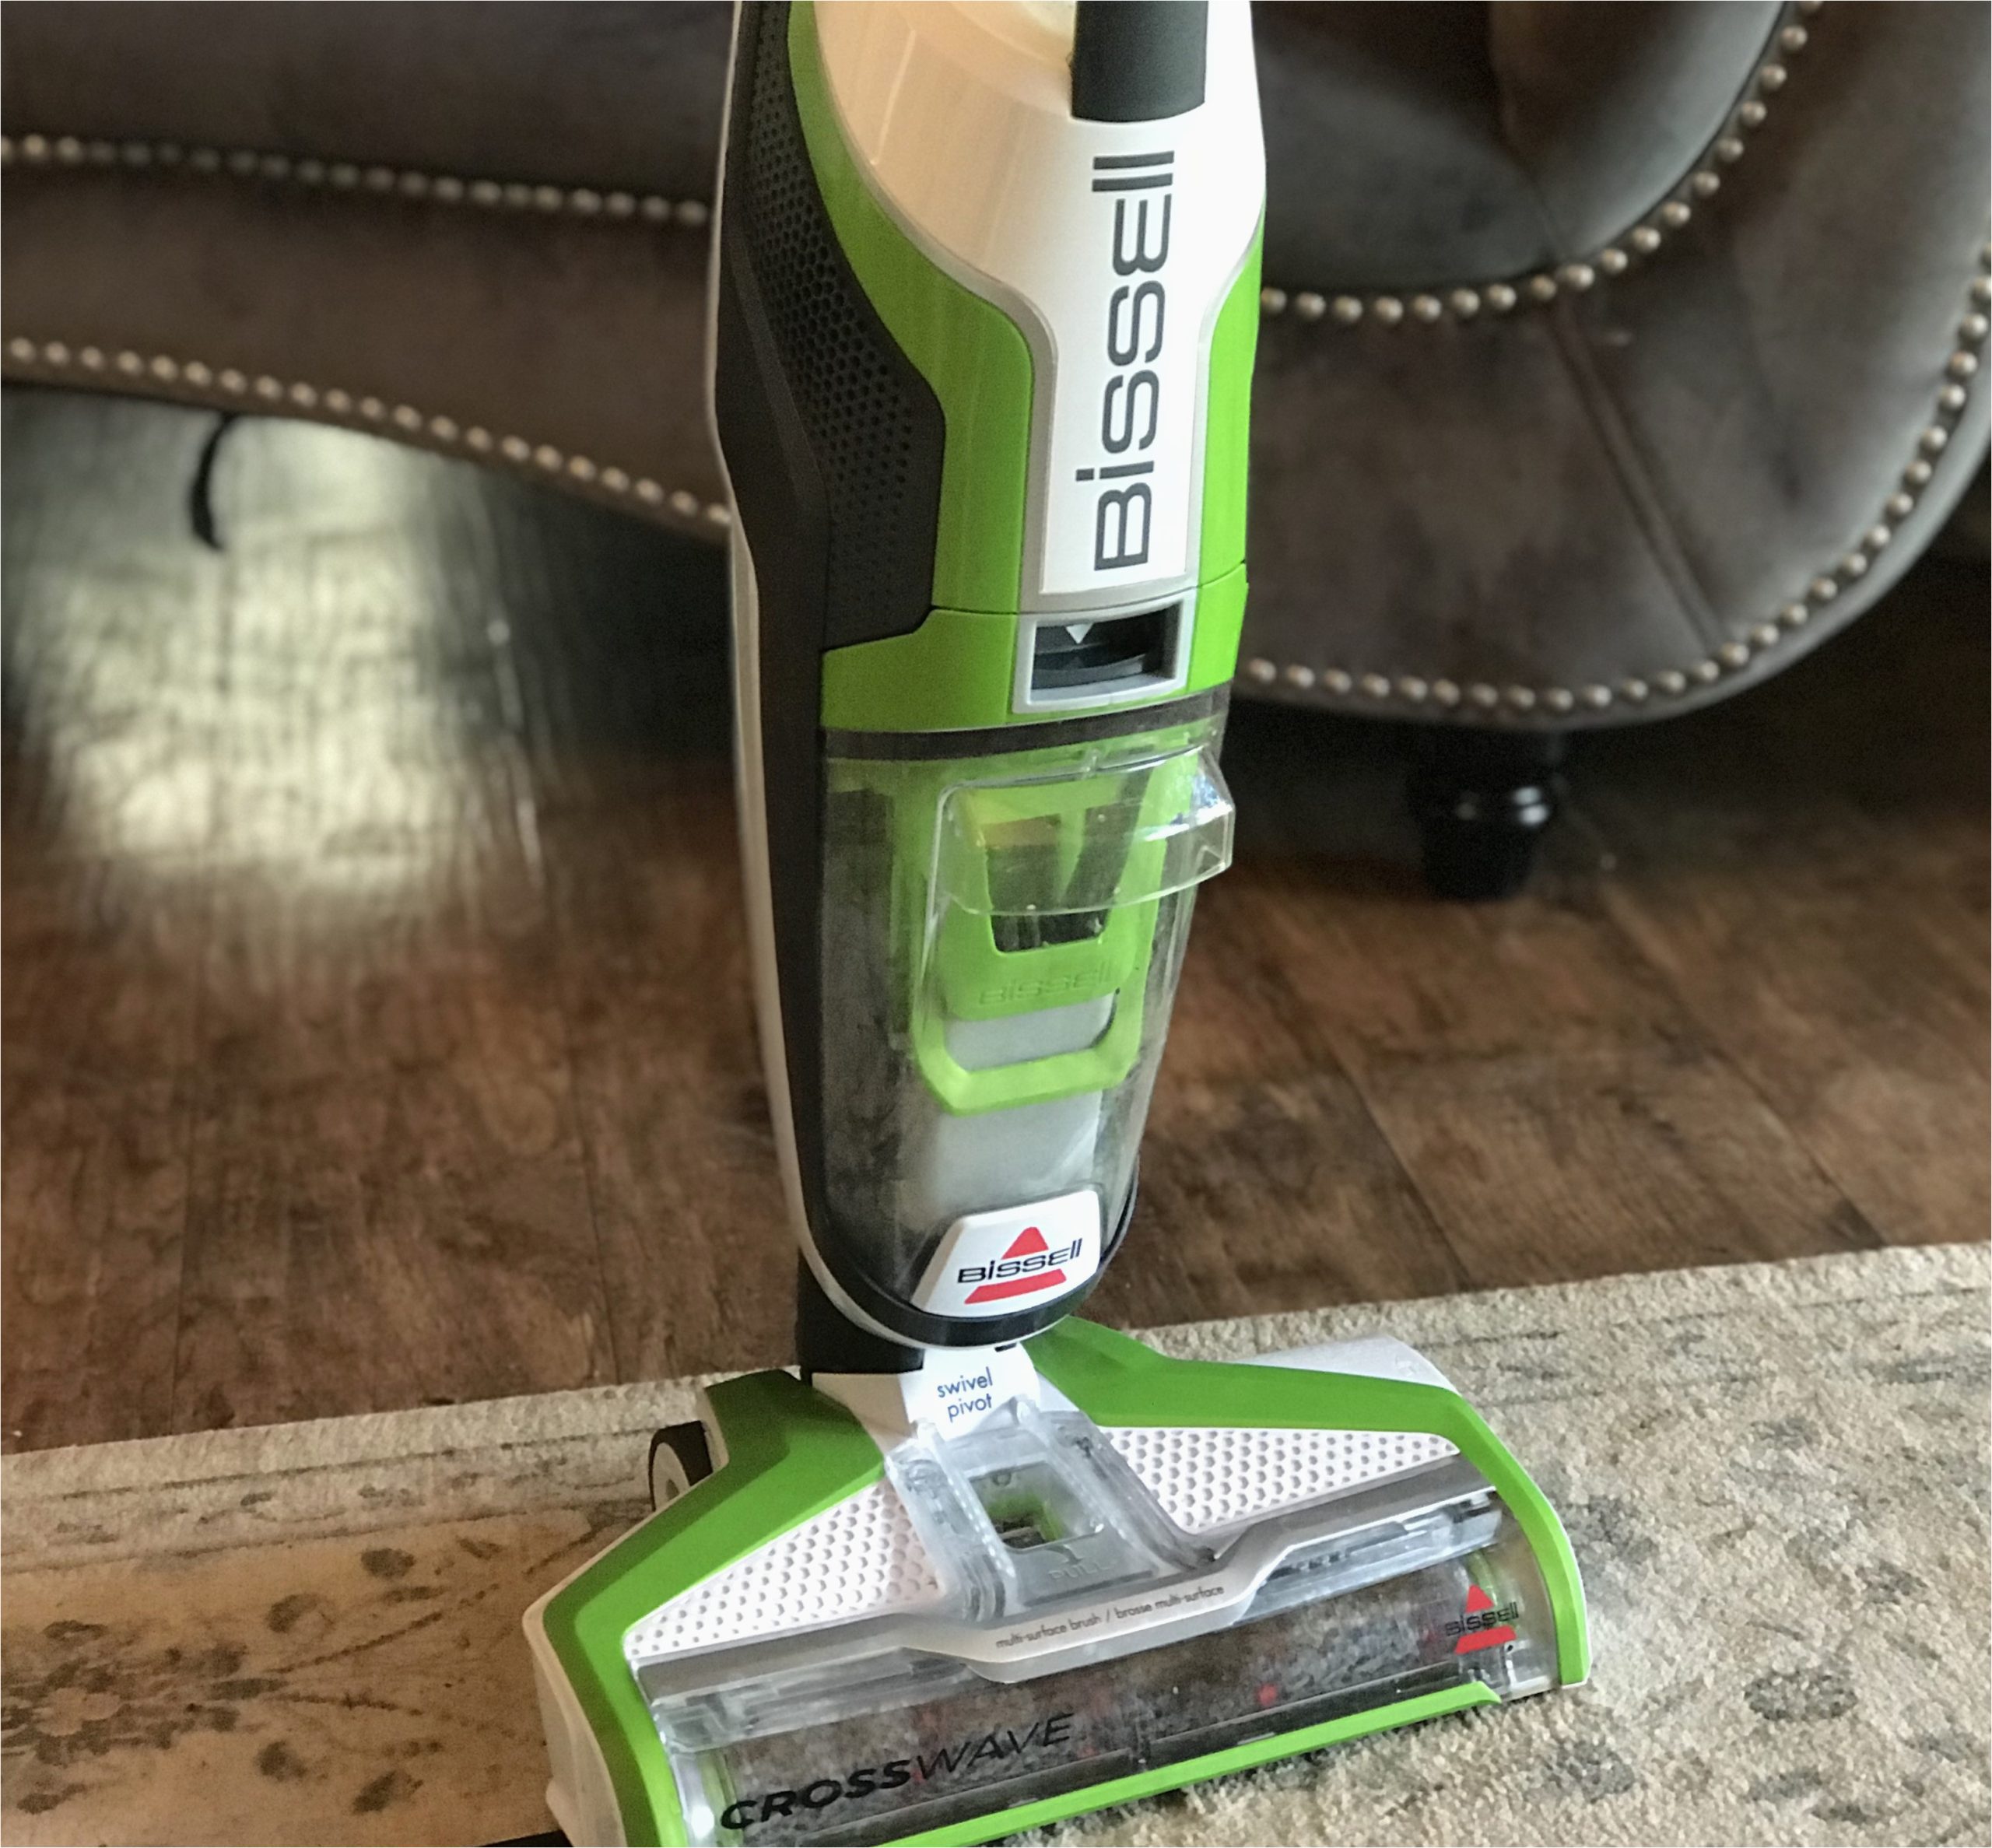 Bissell Crosswave On area Rugs Bissell Crosswave Wet Dry Vacuum Review